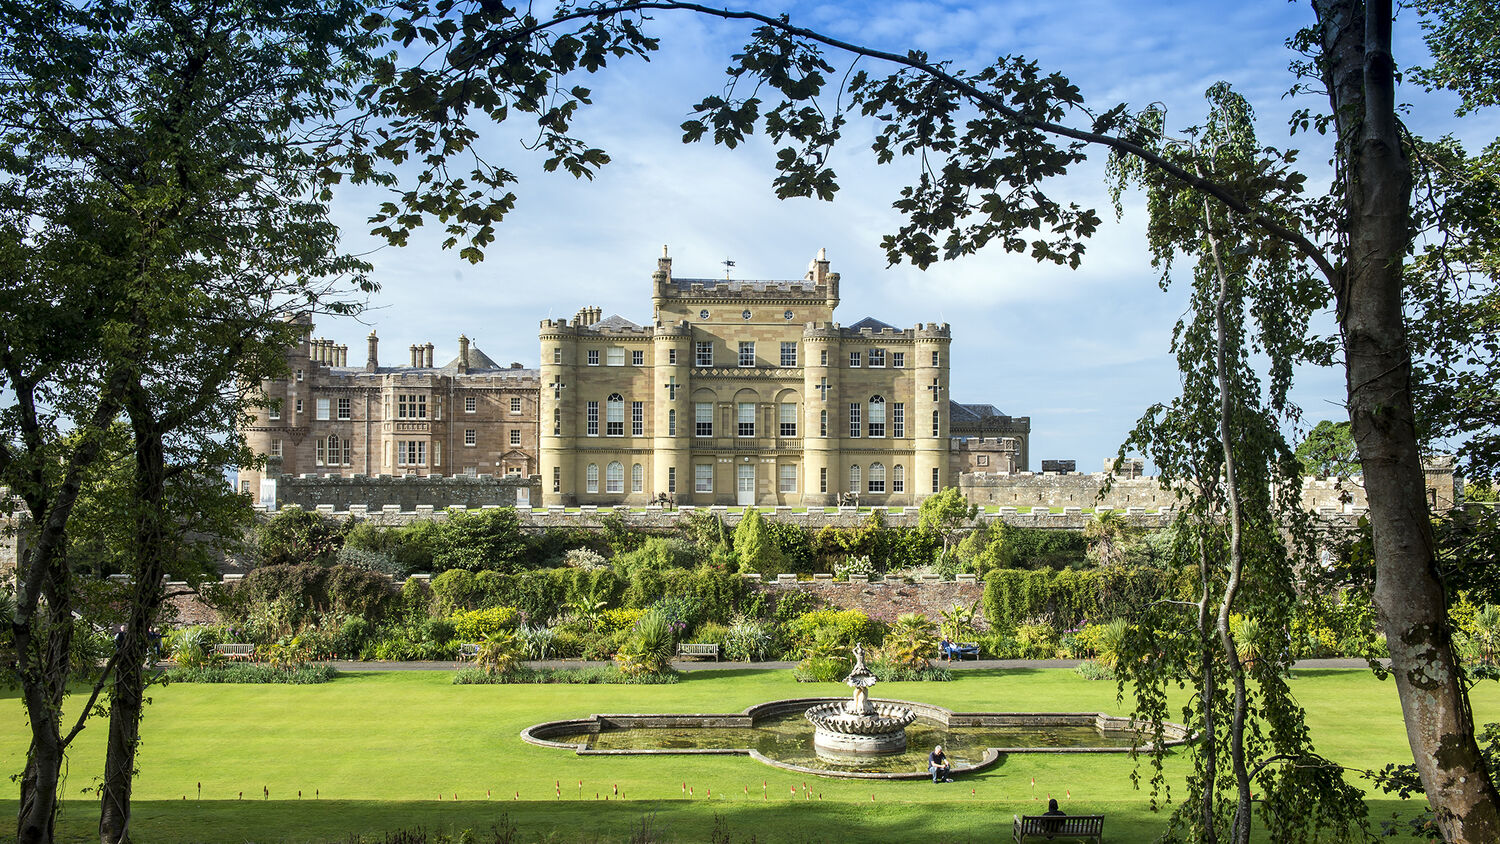 Looking towards Culzean Castle, with the Fountain Court garden in the foreground.